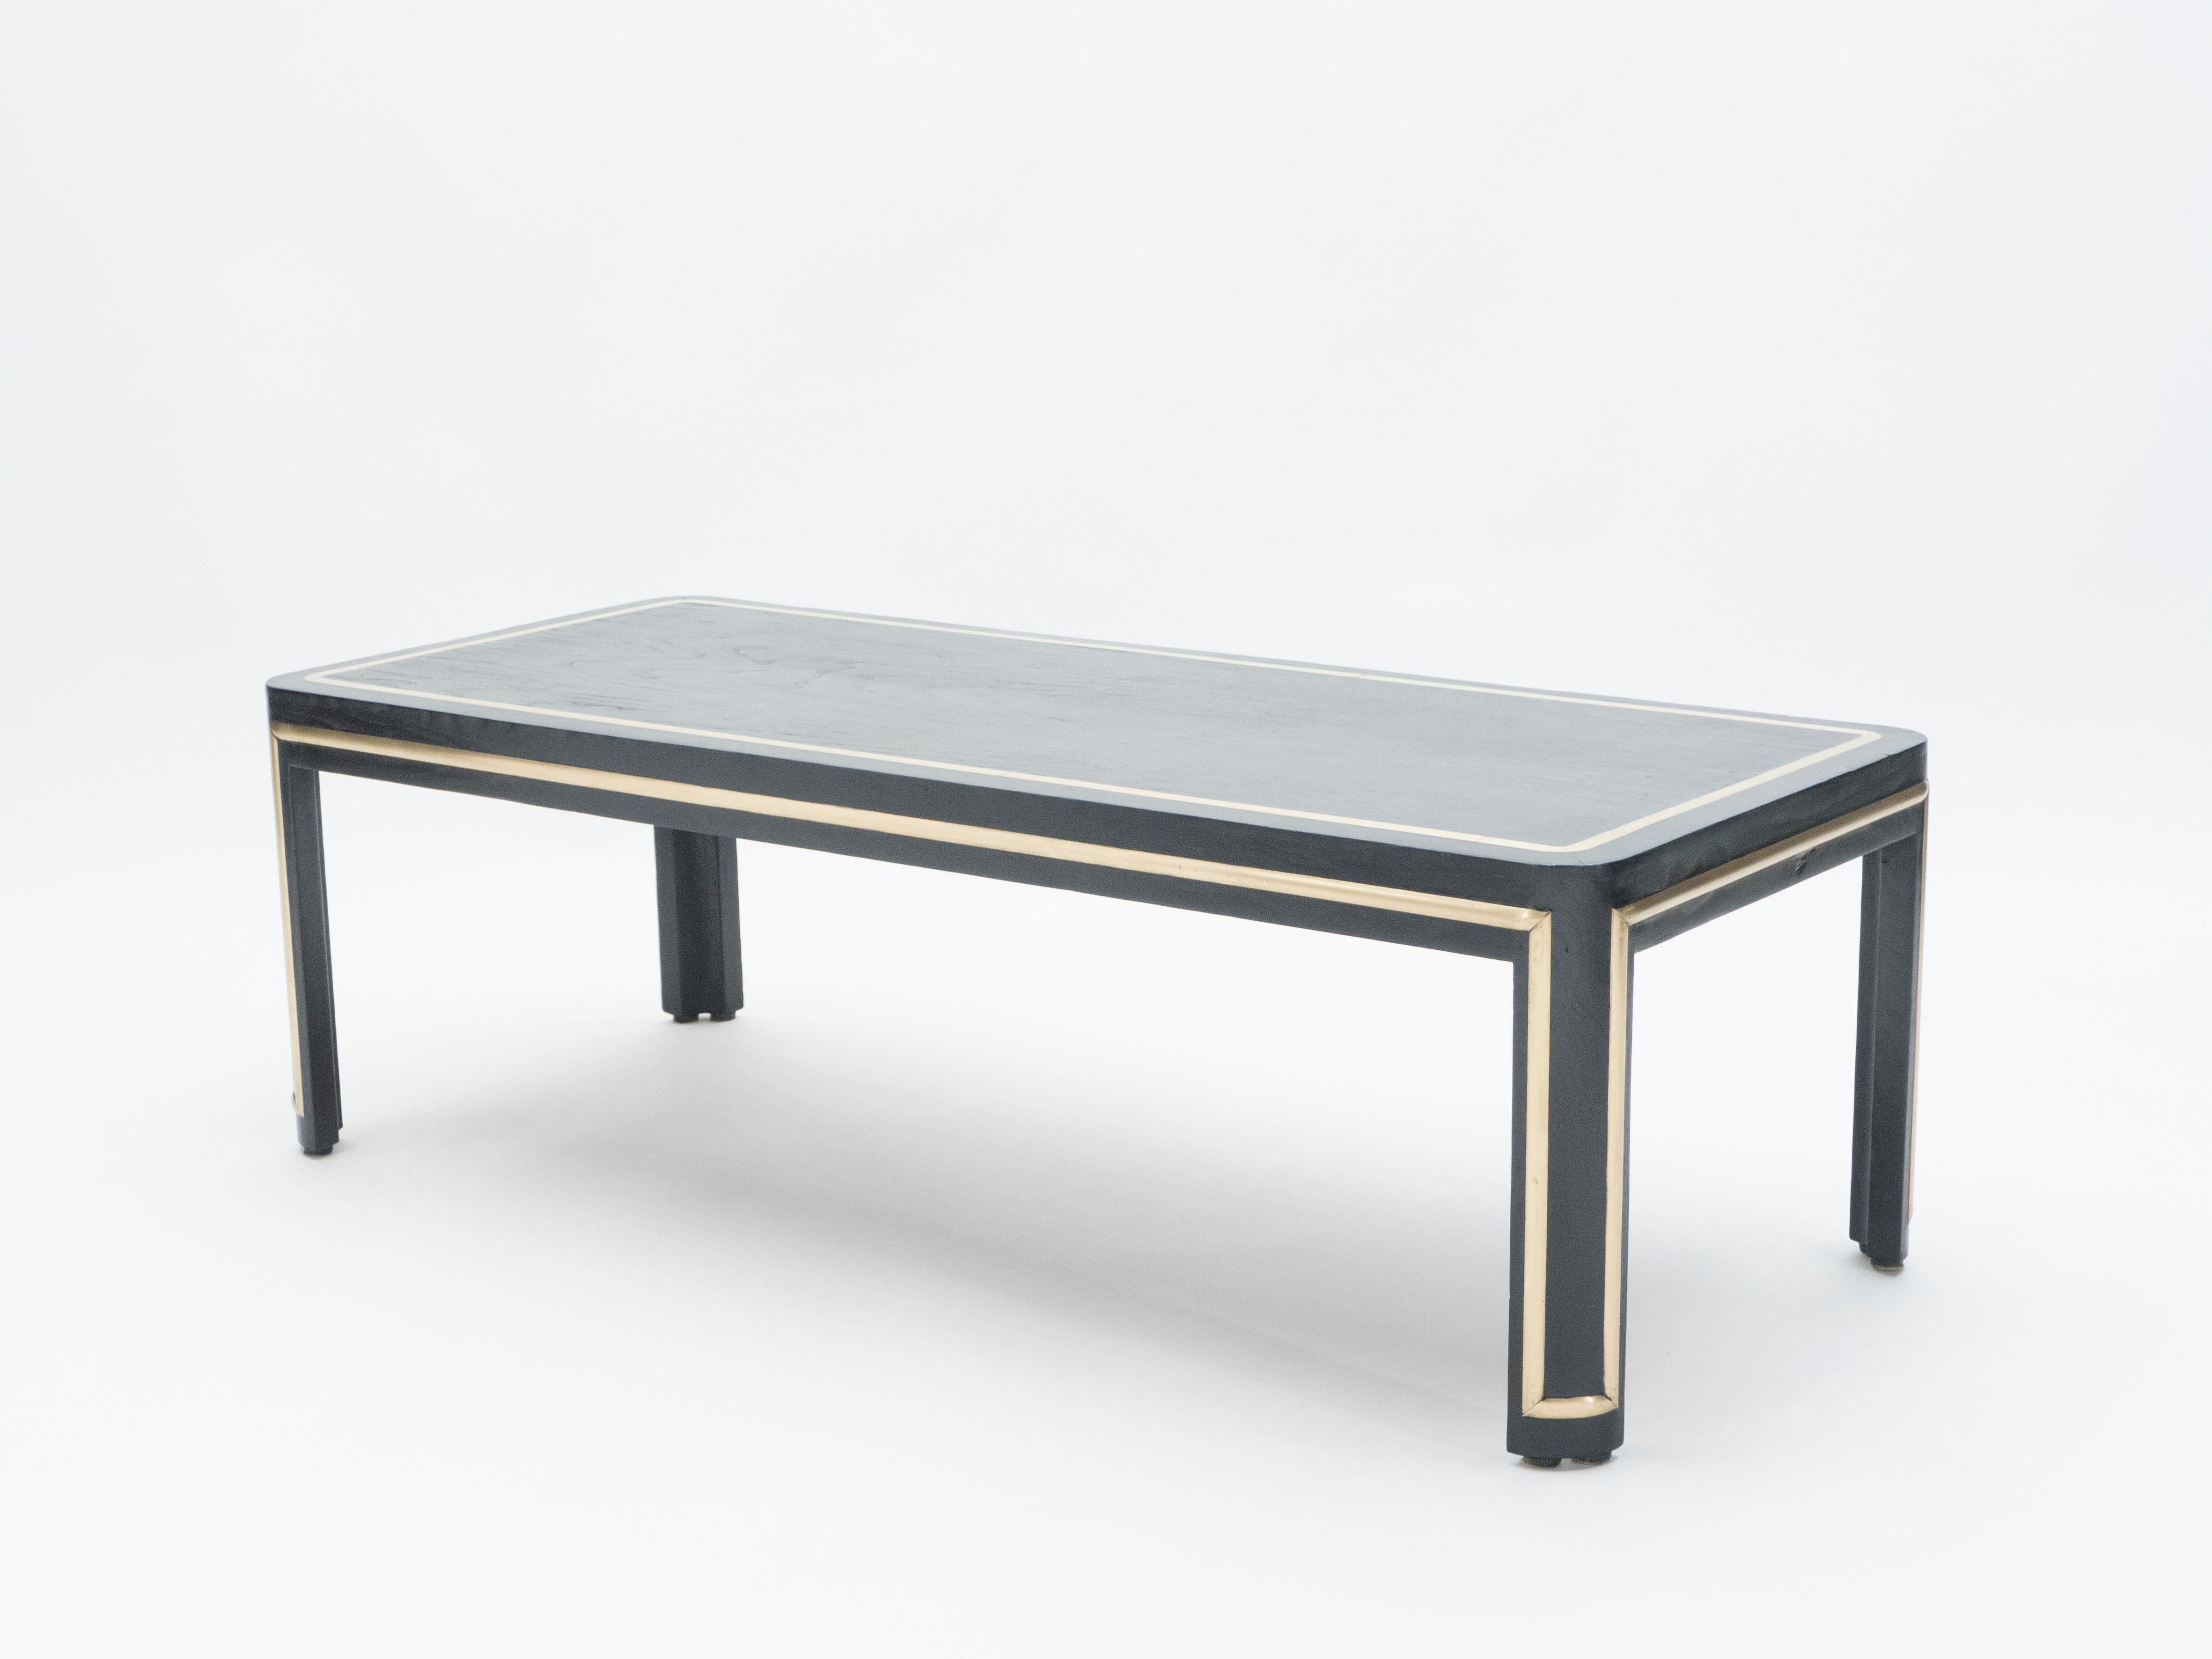 Mid-20th Century French Black Wood and Brass Art Deco Coffee Table 1940s For Sale